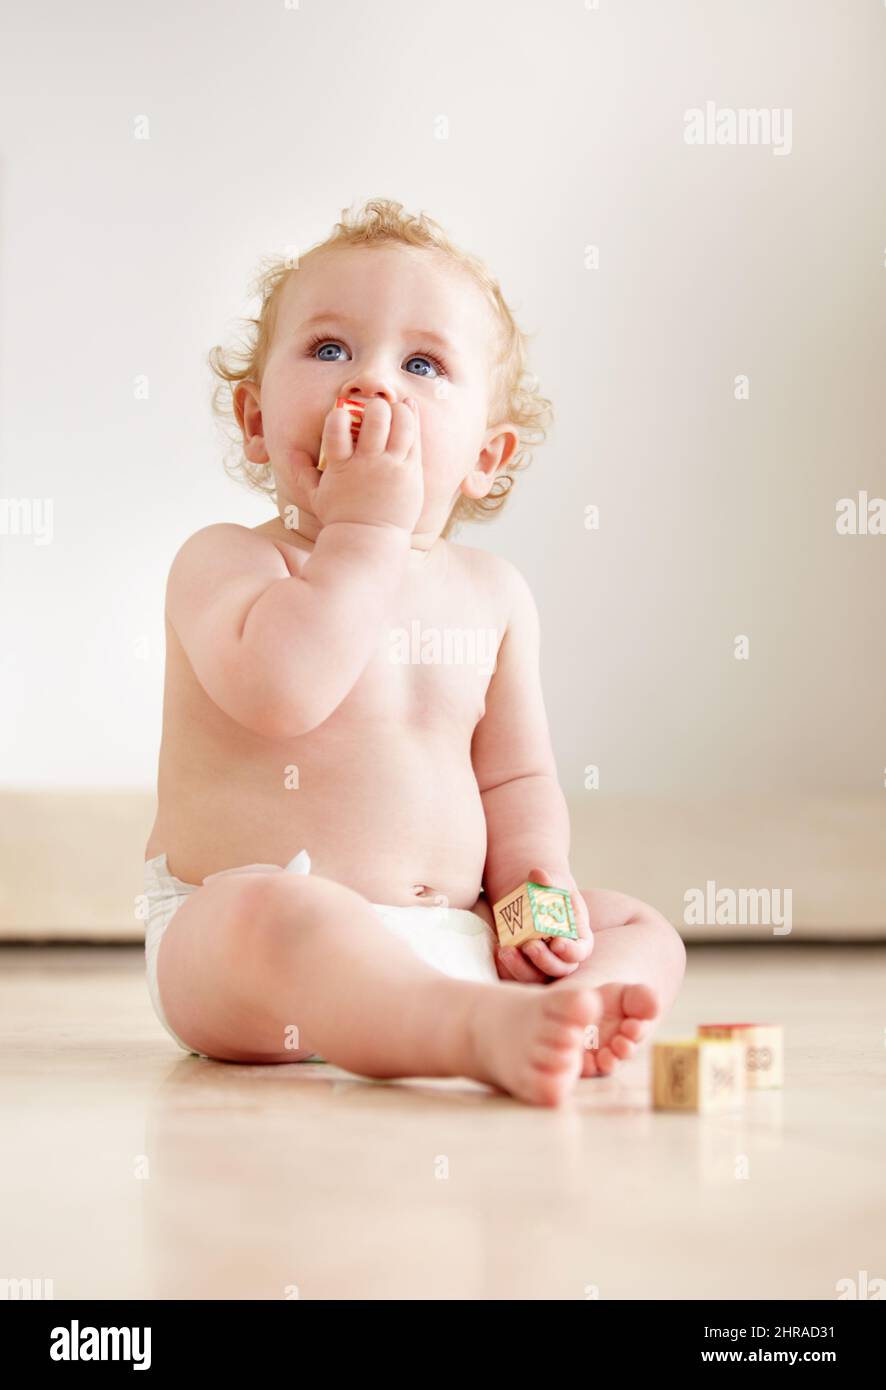 Filled with curiousity and wonder. Cute baby boy looking up curiously while sitting on the floor. Stock Photo